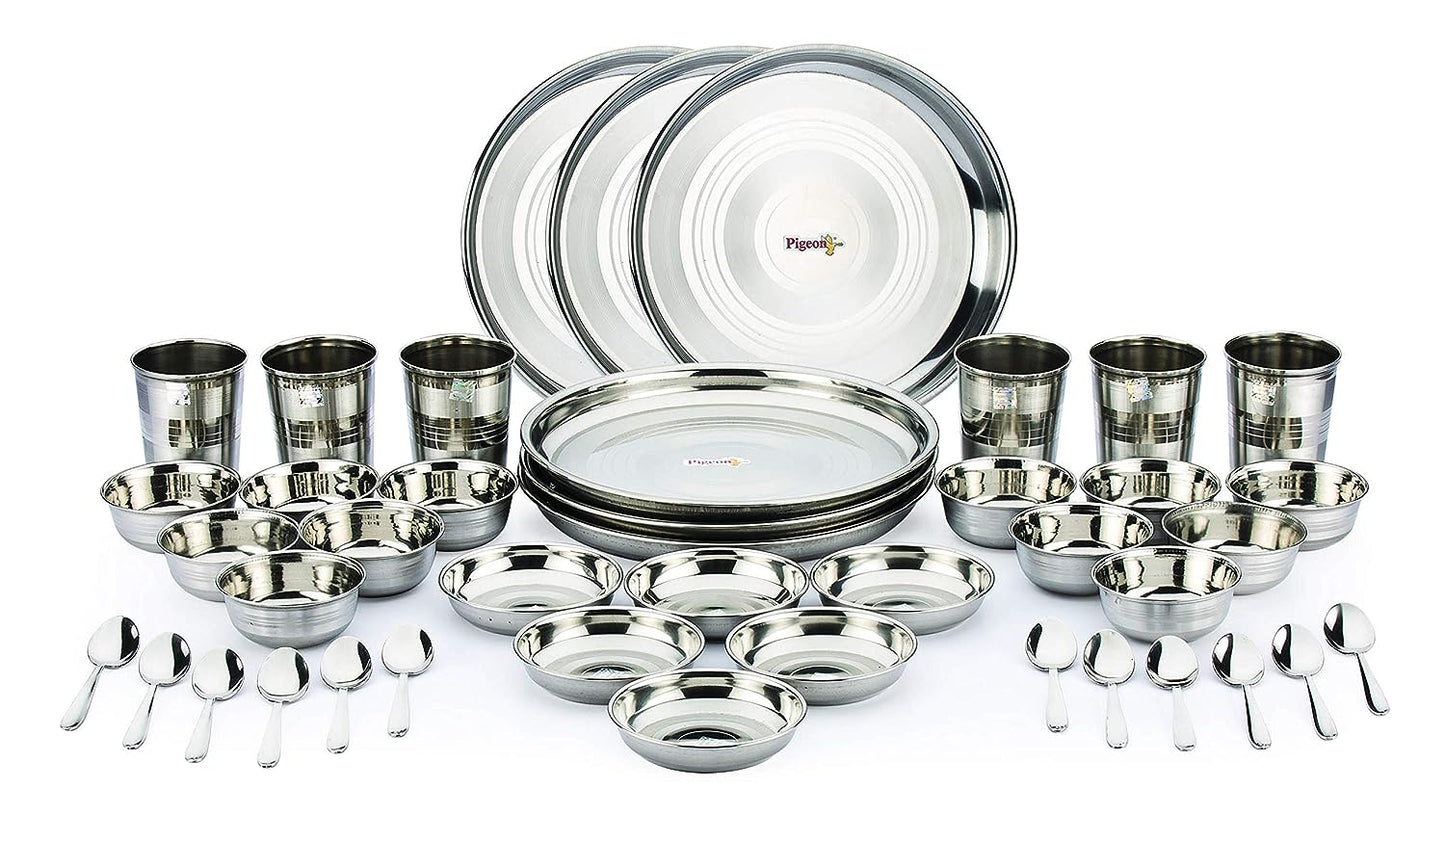 Pigeon Royal Stainless Steel 42 Pcs Lunch Set - 50006